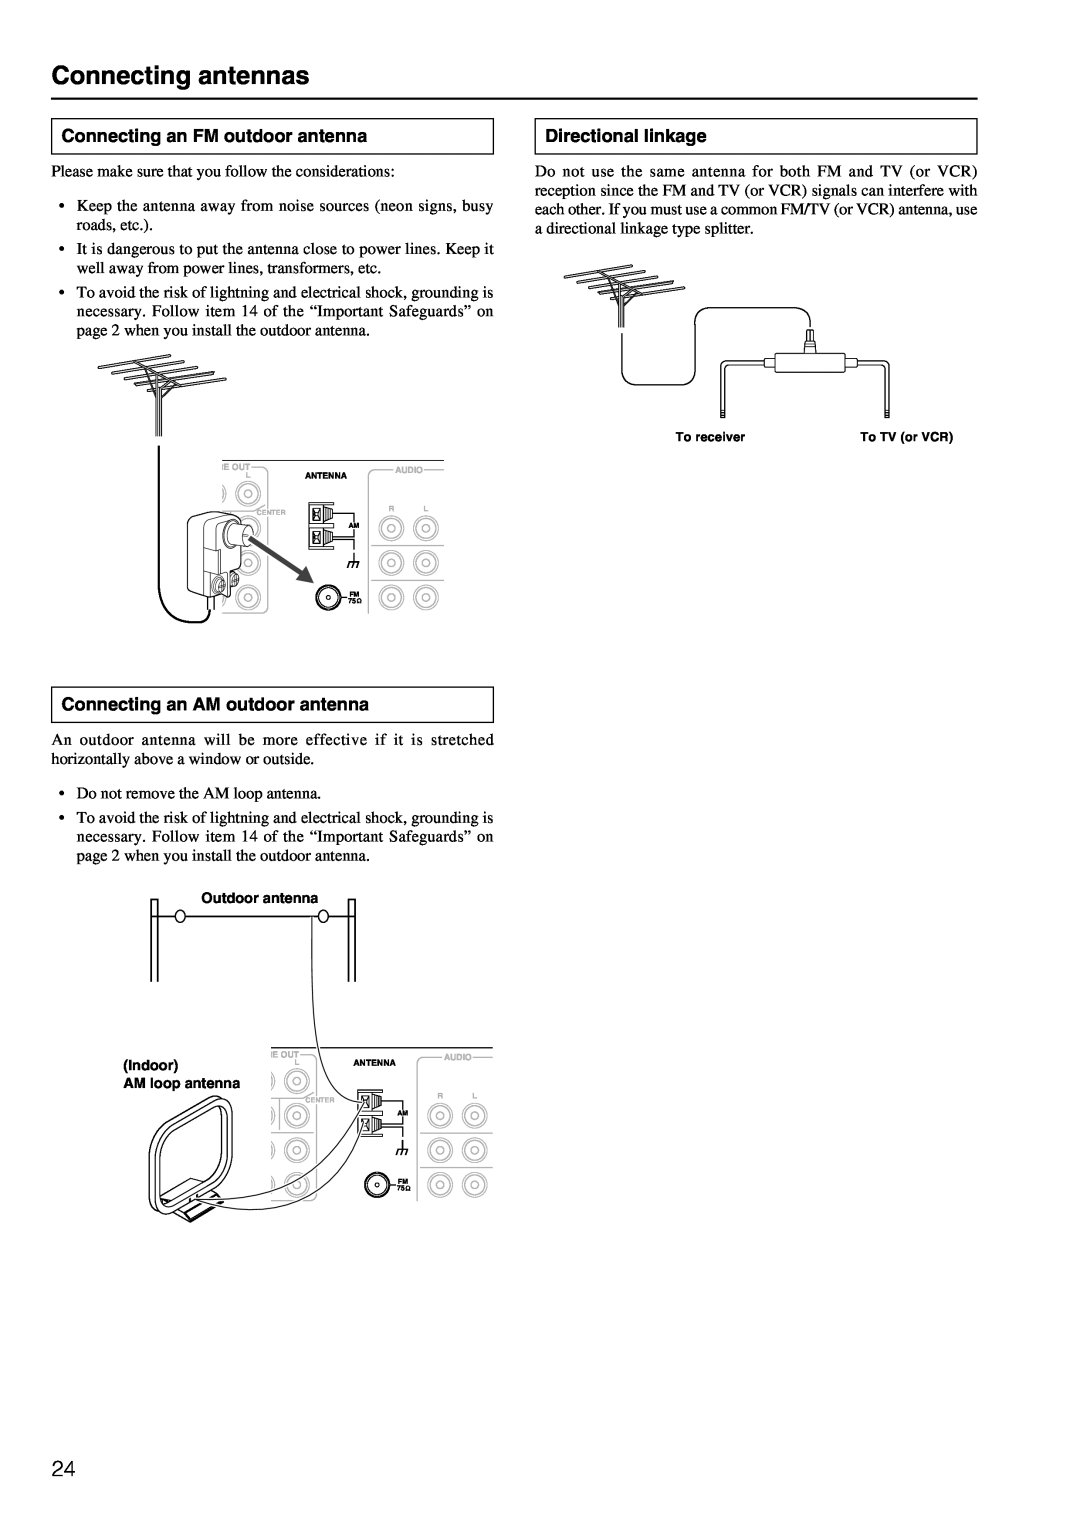 Onkyo TX-DS898 instruction manual Connecting antennas, Connecting an FM outdoor antenna, Directional linkage 